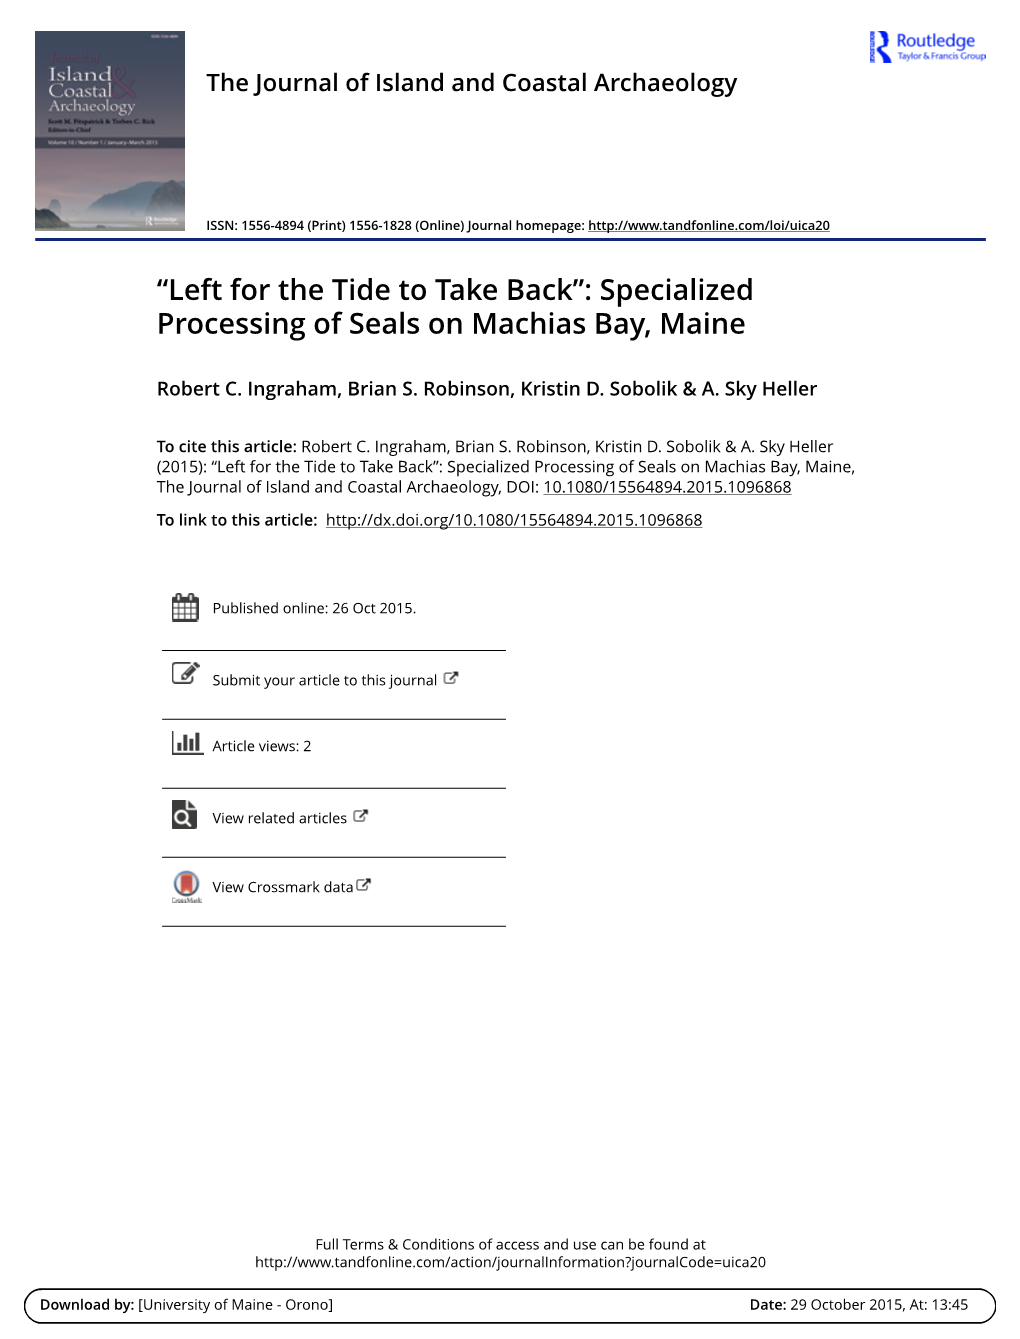 Specialized Processing of Seals on Machias Bay, Maine